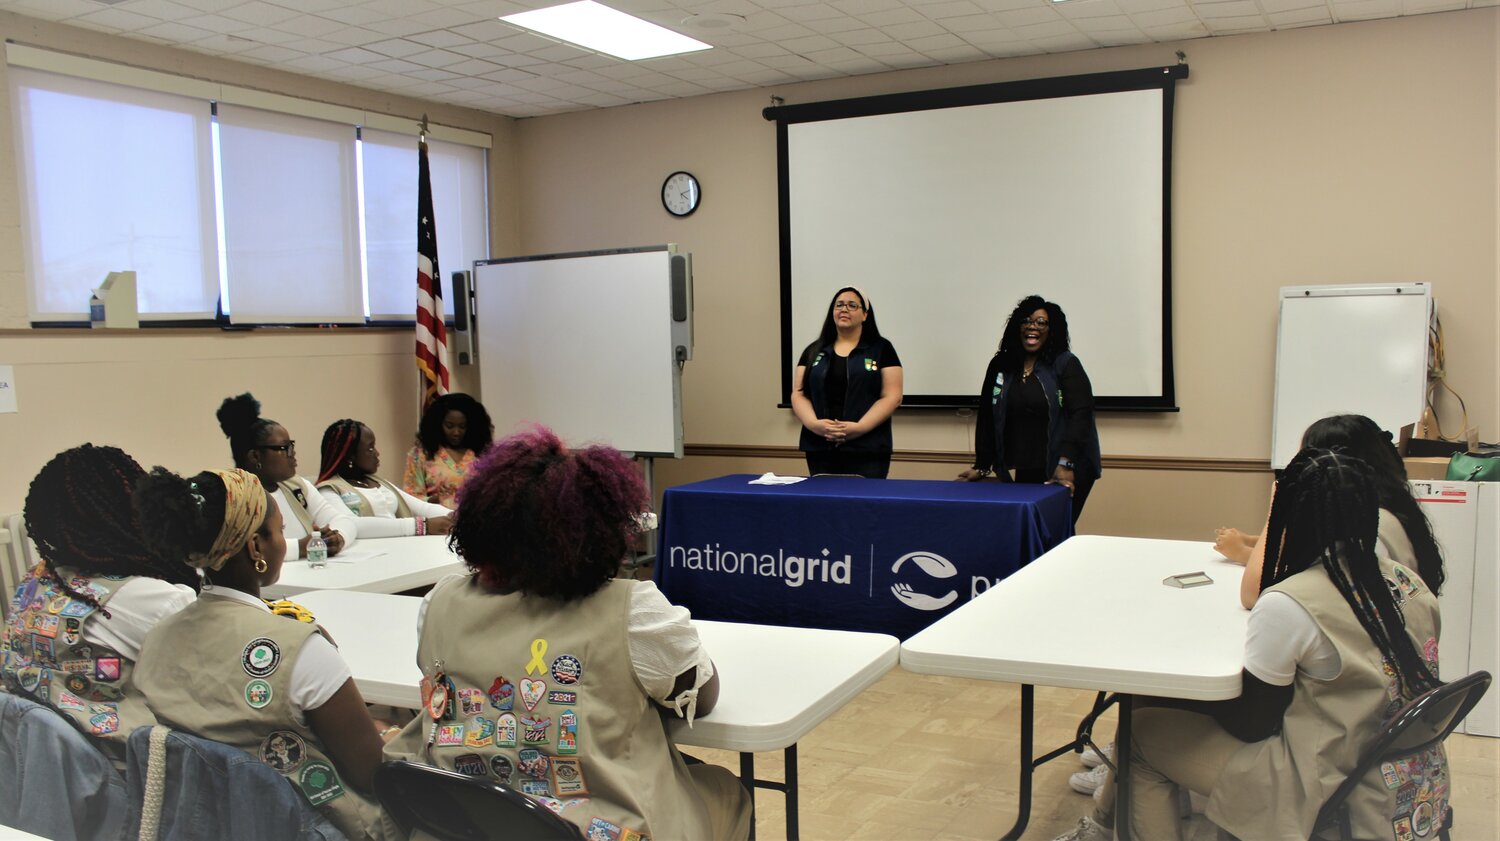 National Grid’s contribution to Project C has supported the planting of 186 new trees and has sponsored events to help girls excel in non-traditional careers and trades.